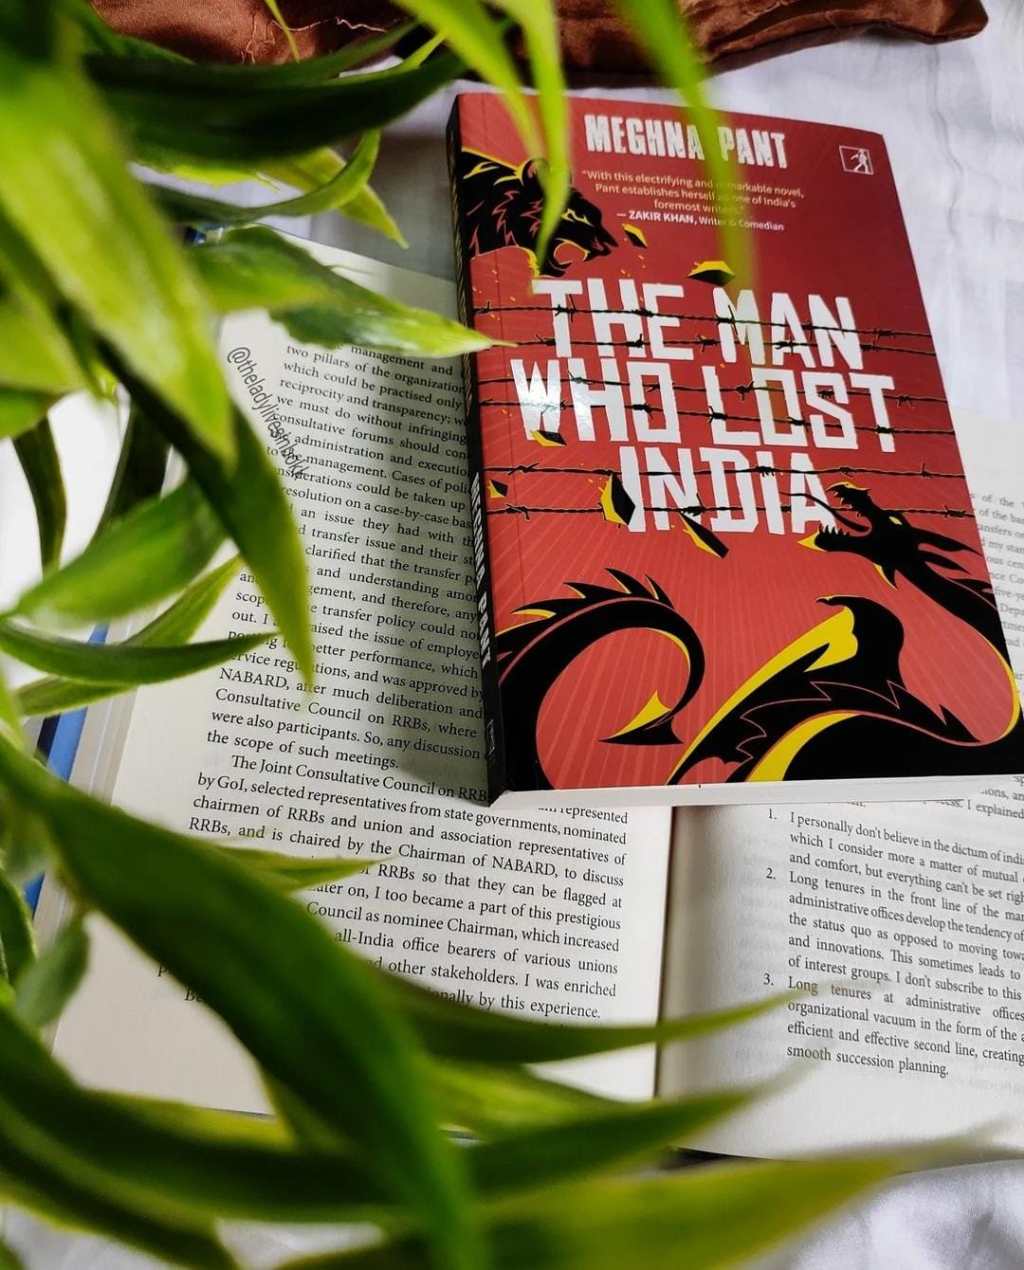 The Man Who Lost India by Meghna Pant, a brilliant futuristic attempt – Book Review